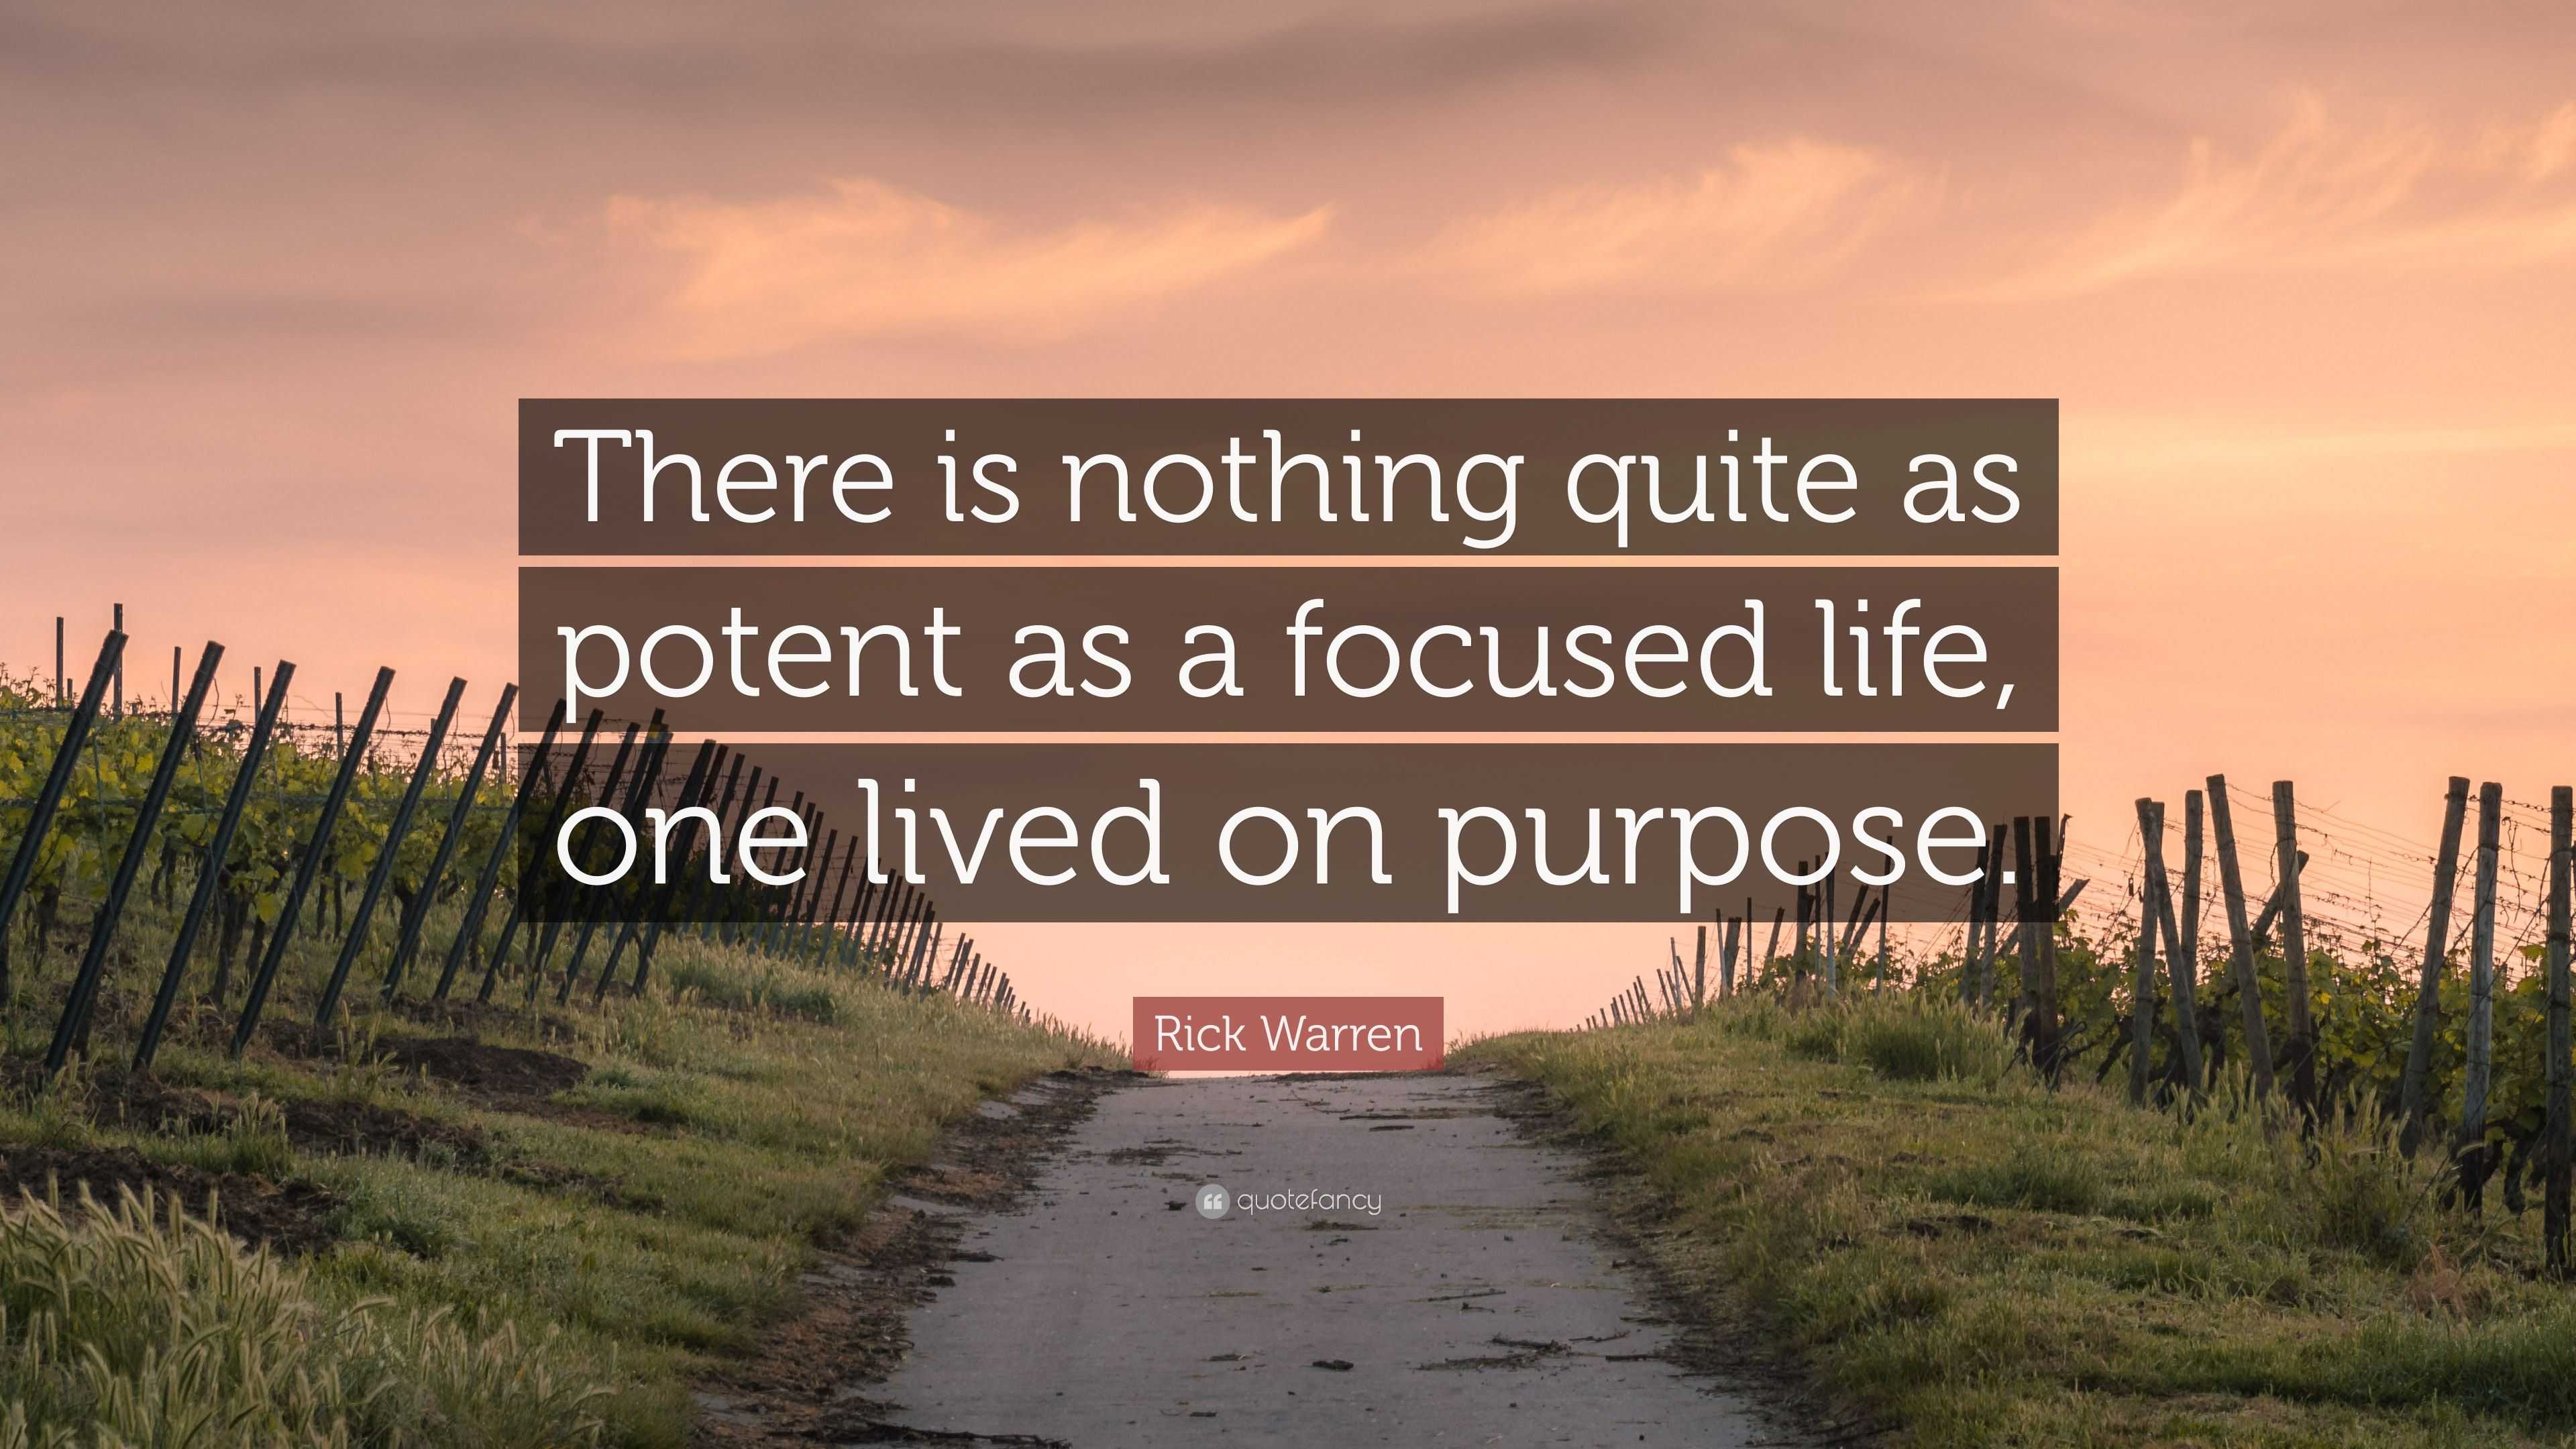 Rick Warren Quote: “There is nothing quite as potent as a focused life ...